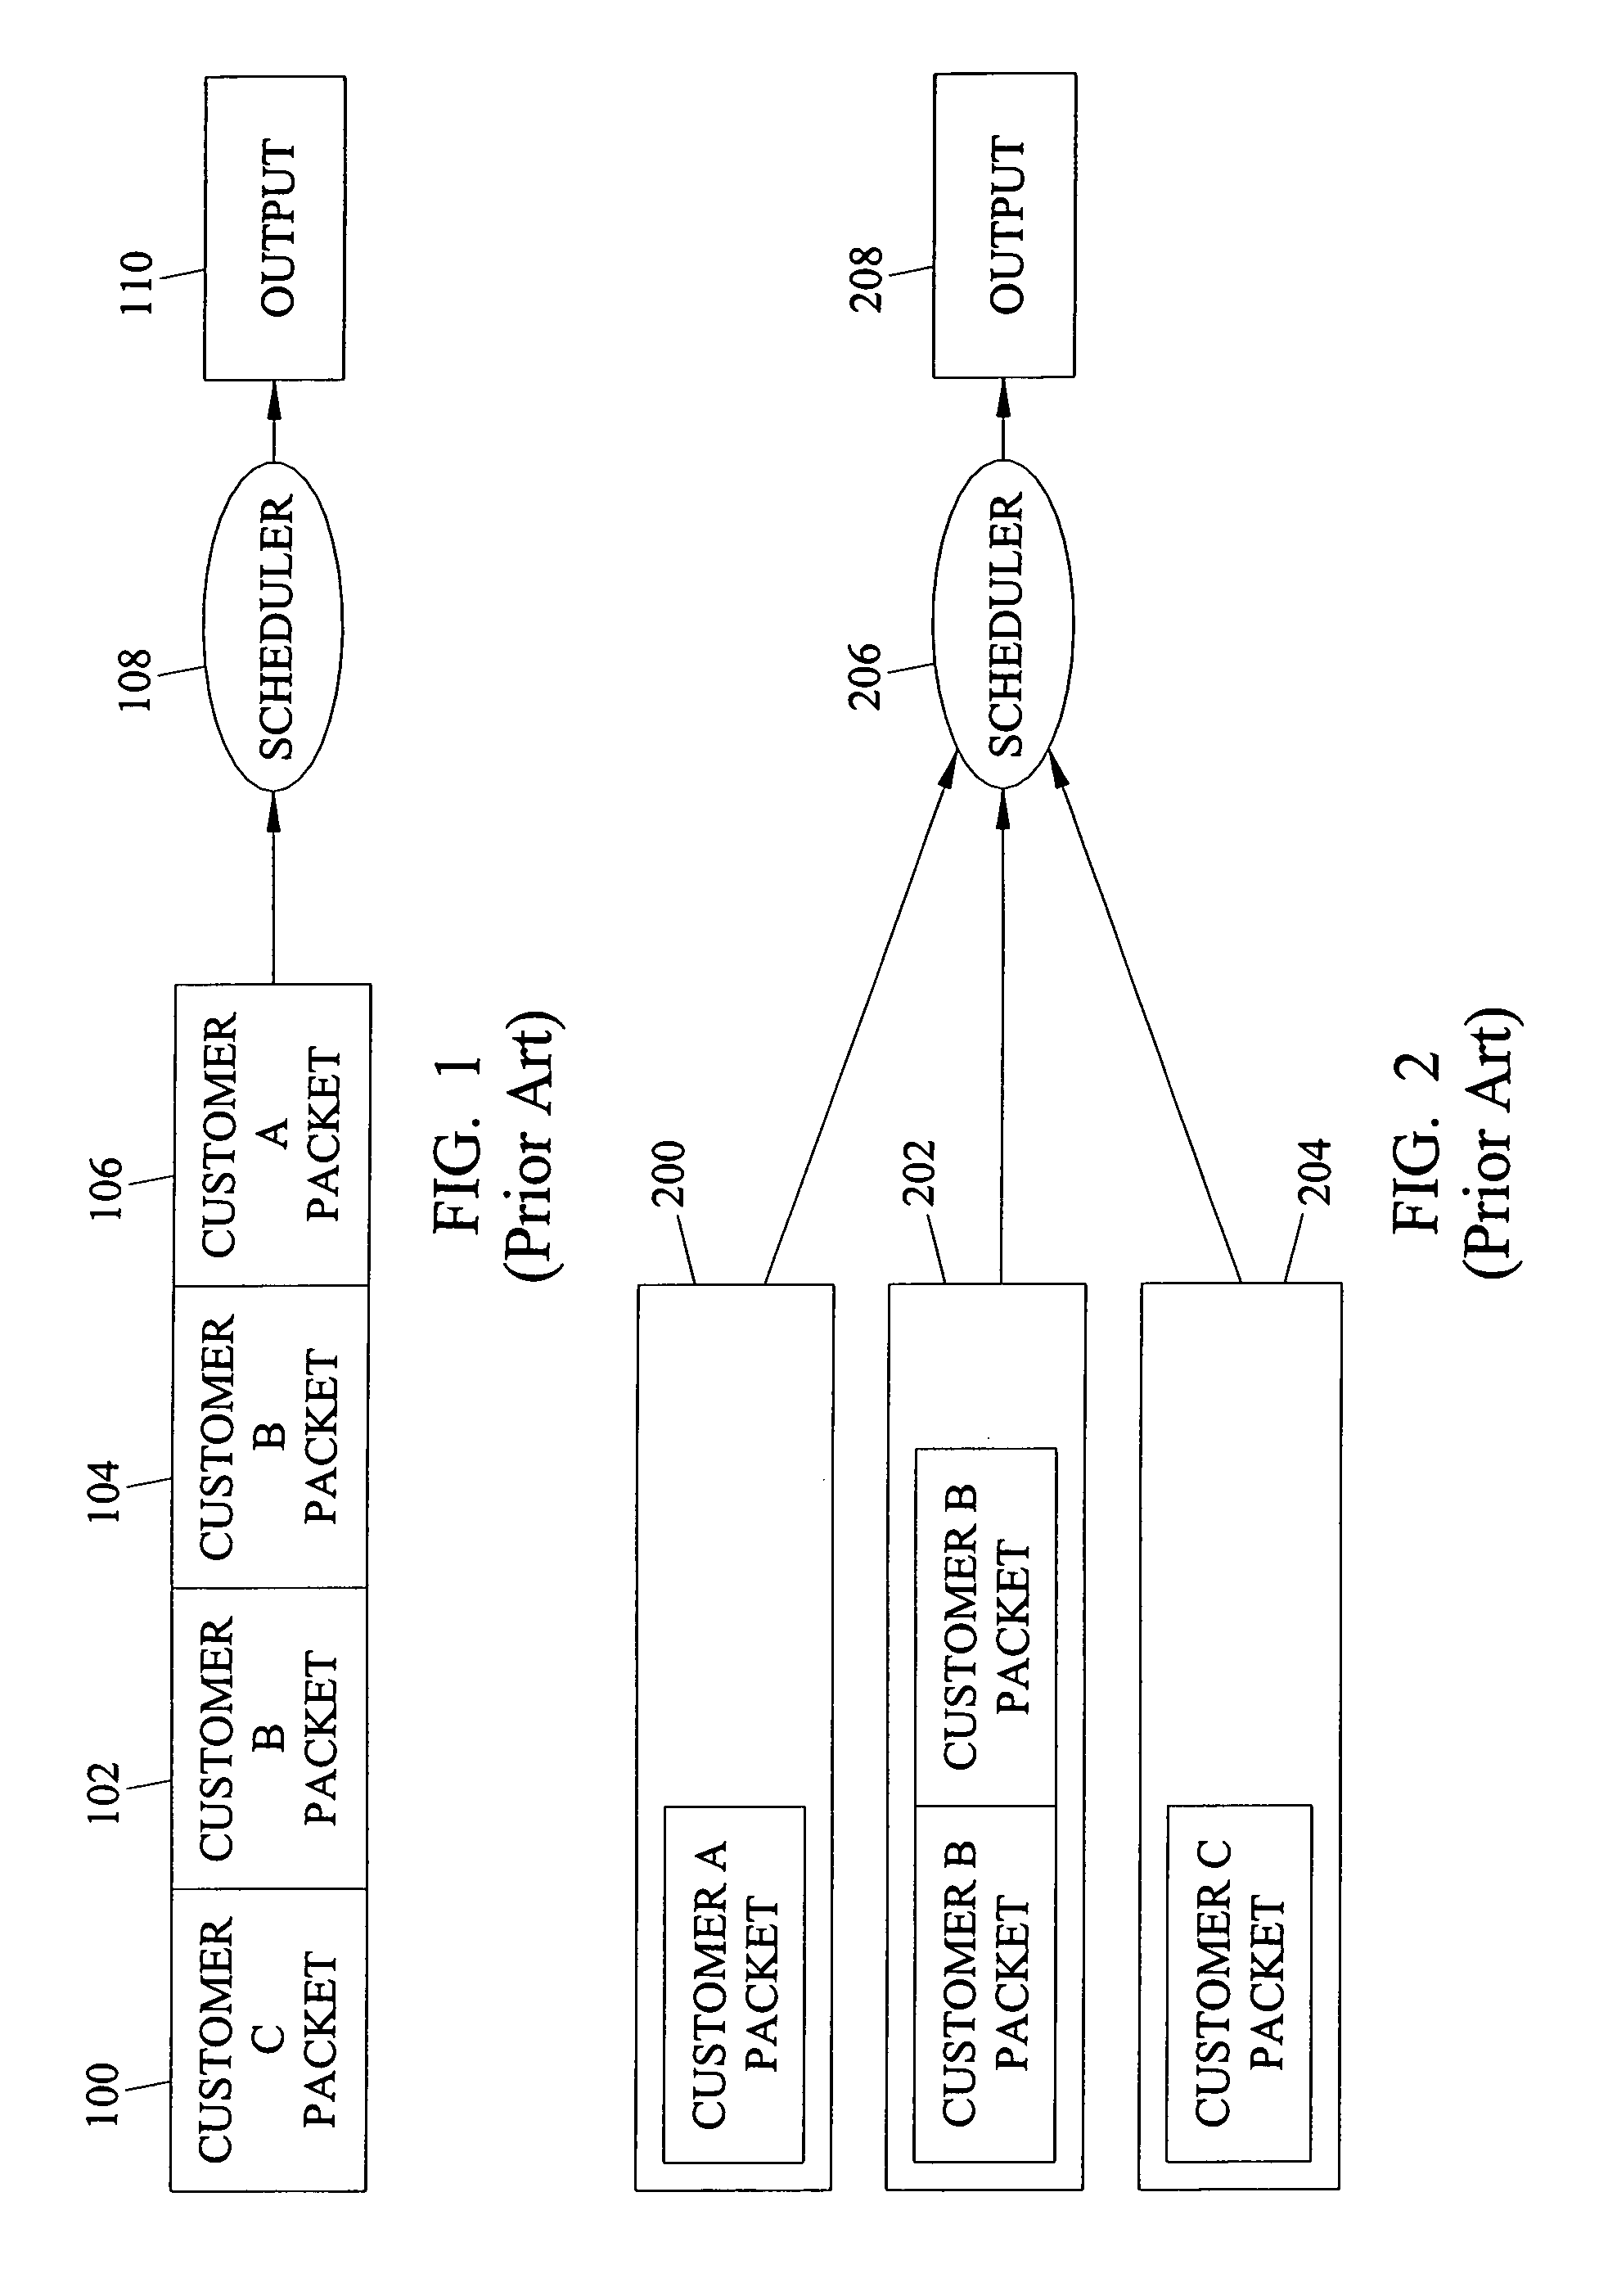 Methods, systems, and computer program products for allocating excess bandwidth of an output among network users